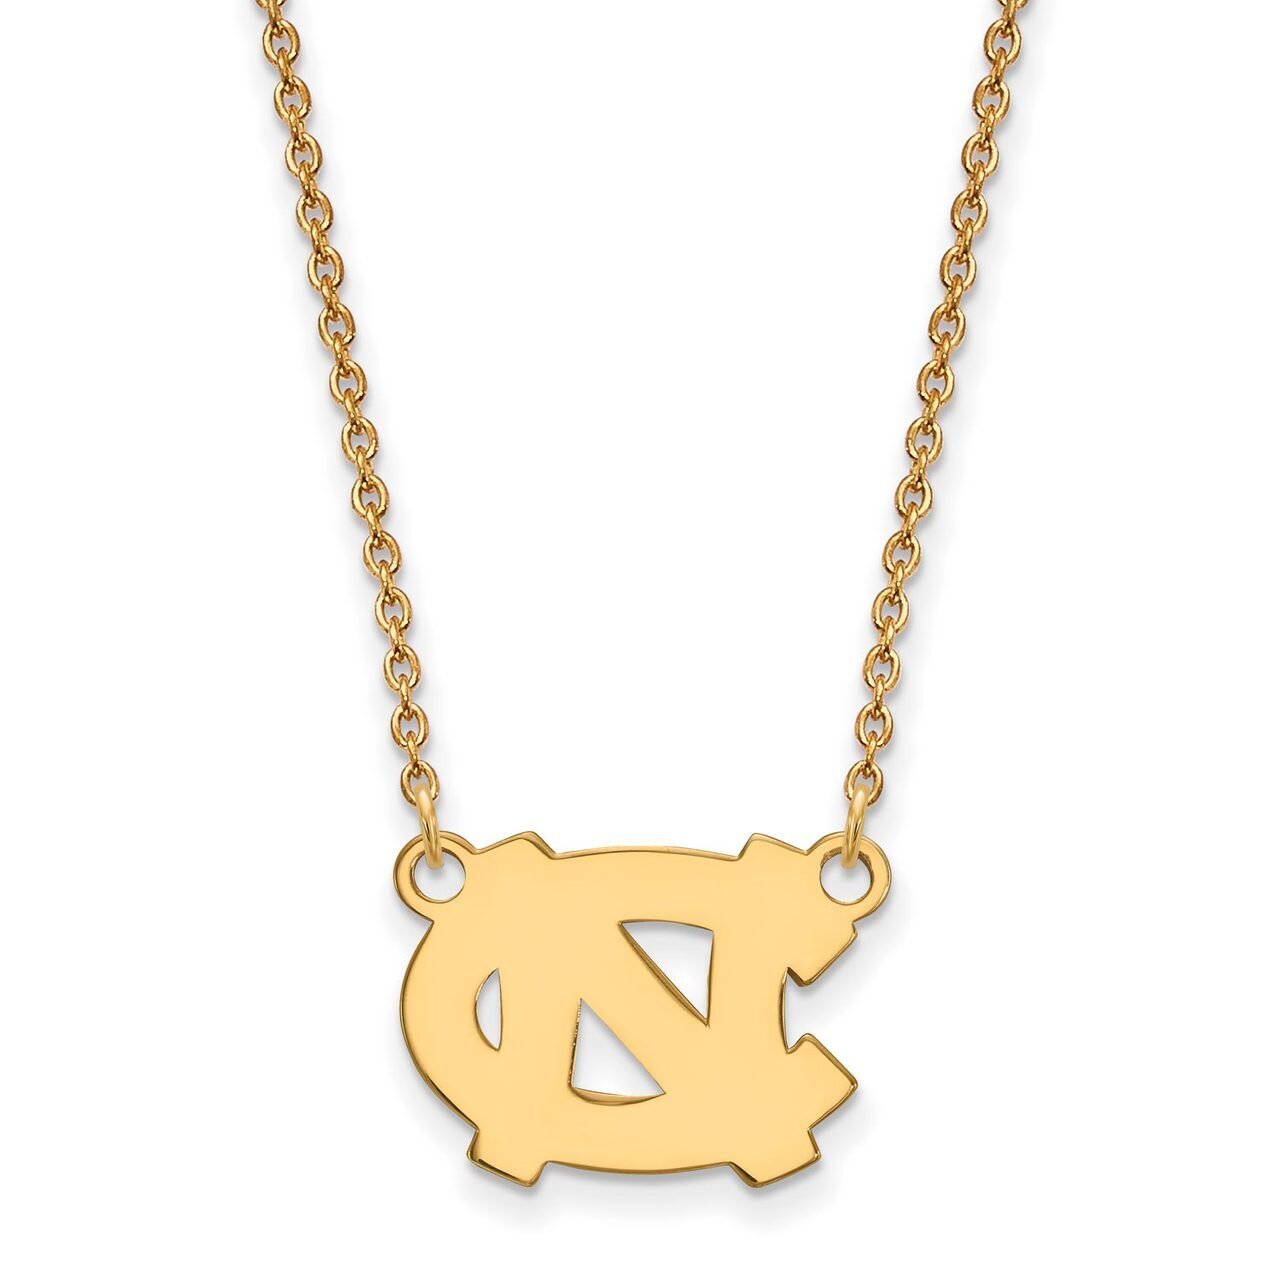 University of North Carolina Small Pendant with Chain Necklace 14k Yellow Gold 4Y014UNC-18